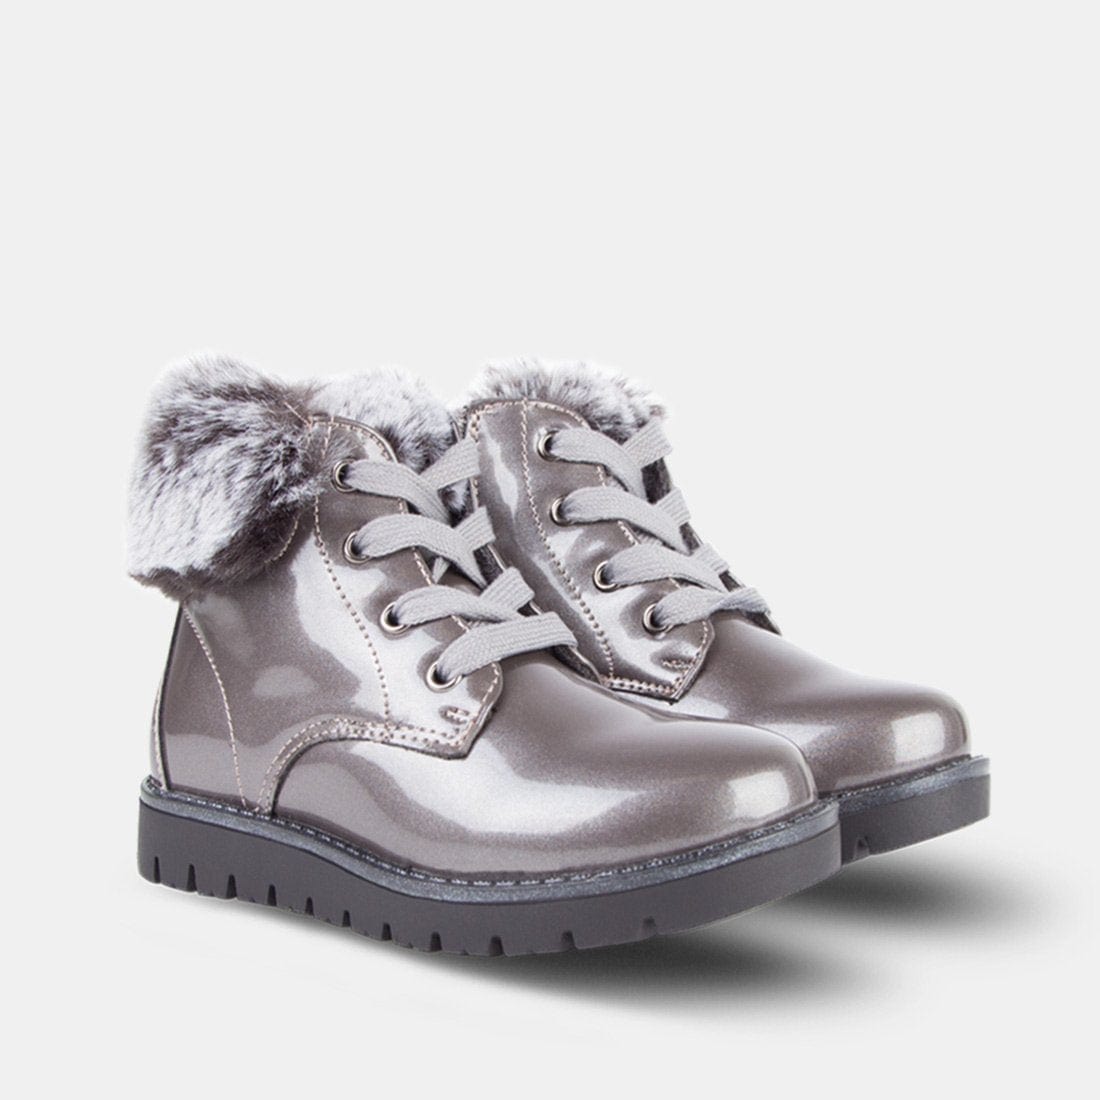 CONGUITOS Shoes Girls Metallic Silver Patent Leather Booties